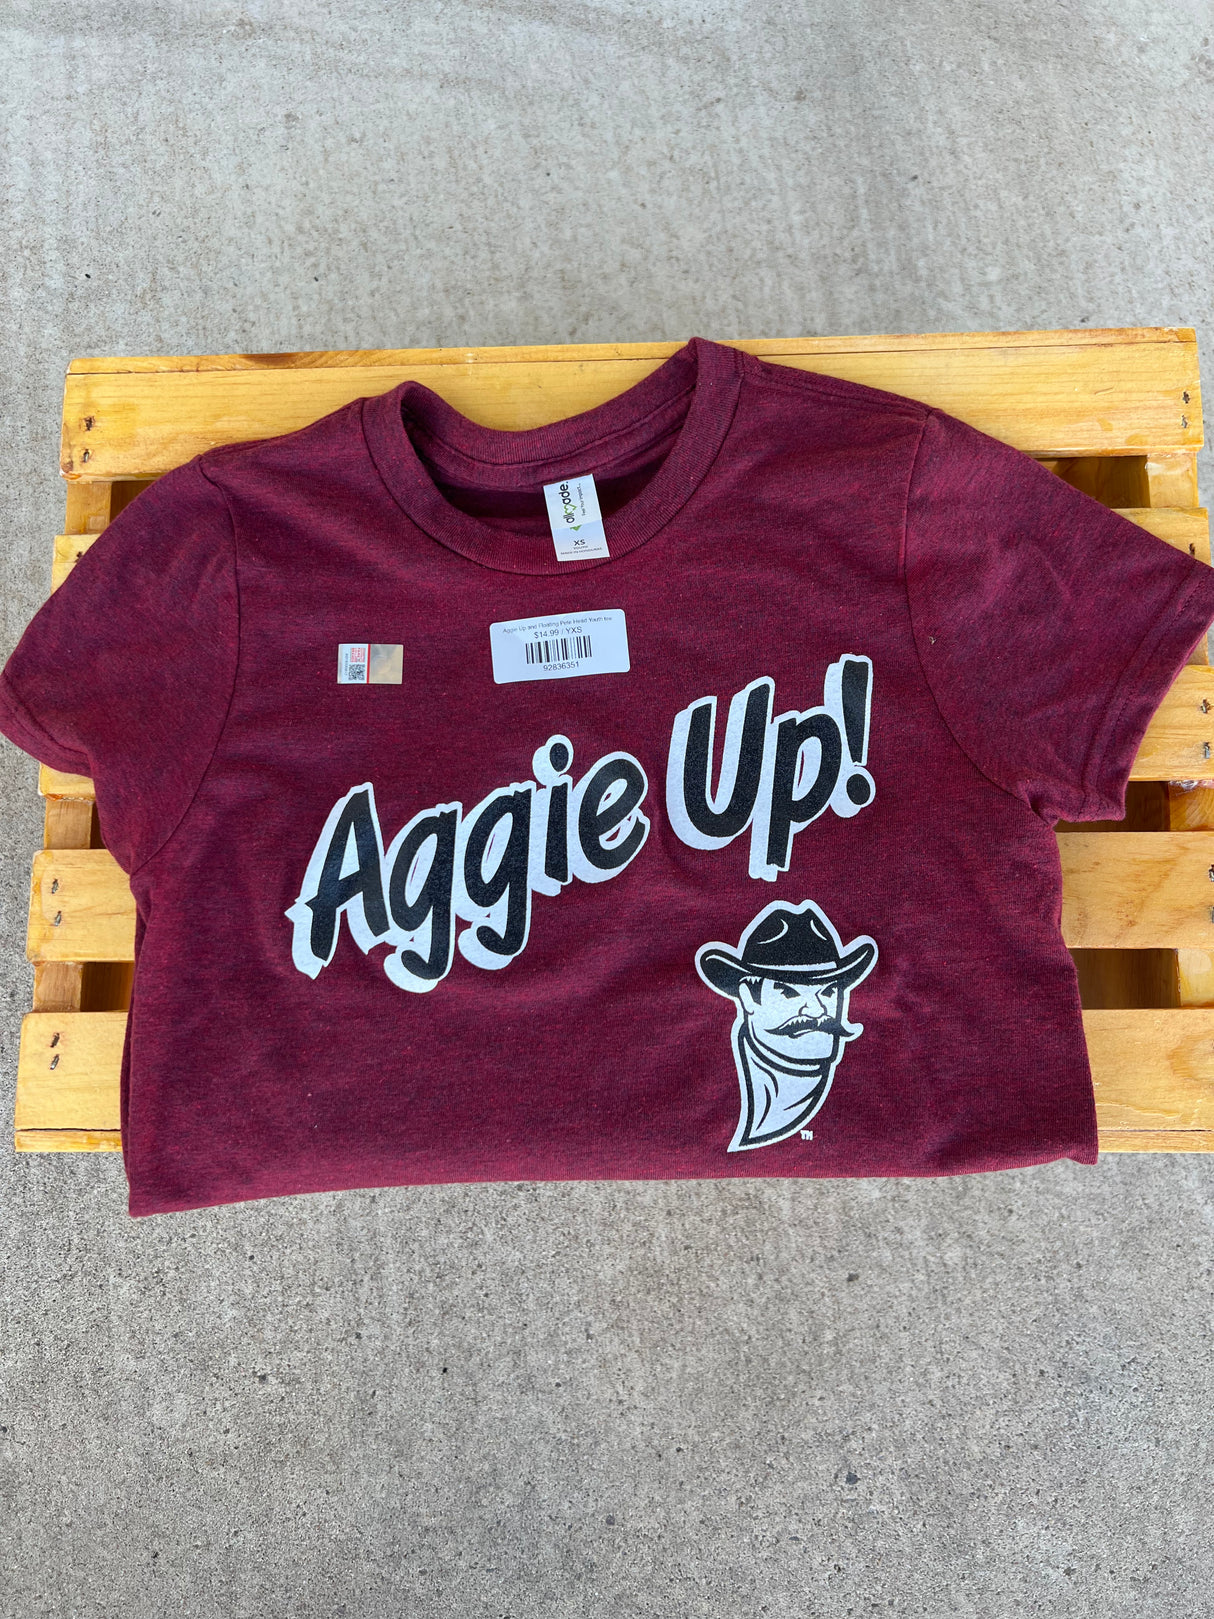 Aggie Up and Floating Pete Head Youth tee